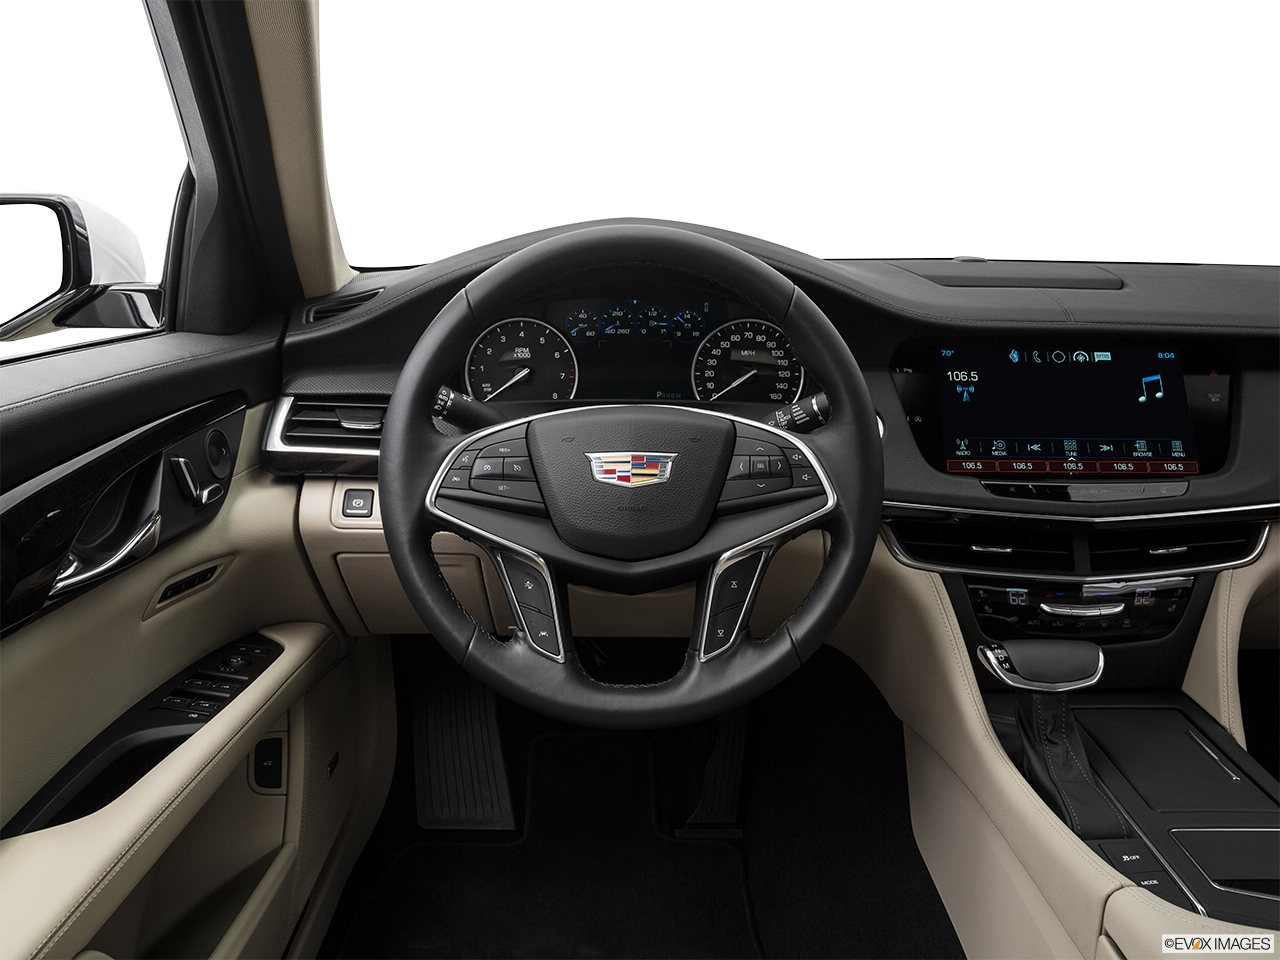 2016 Cadillac CT6 Base Steering wheel/Center Console. 